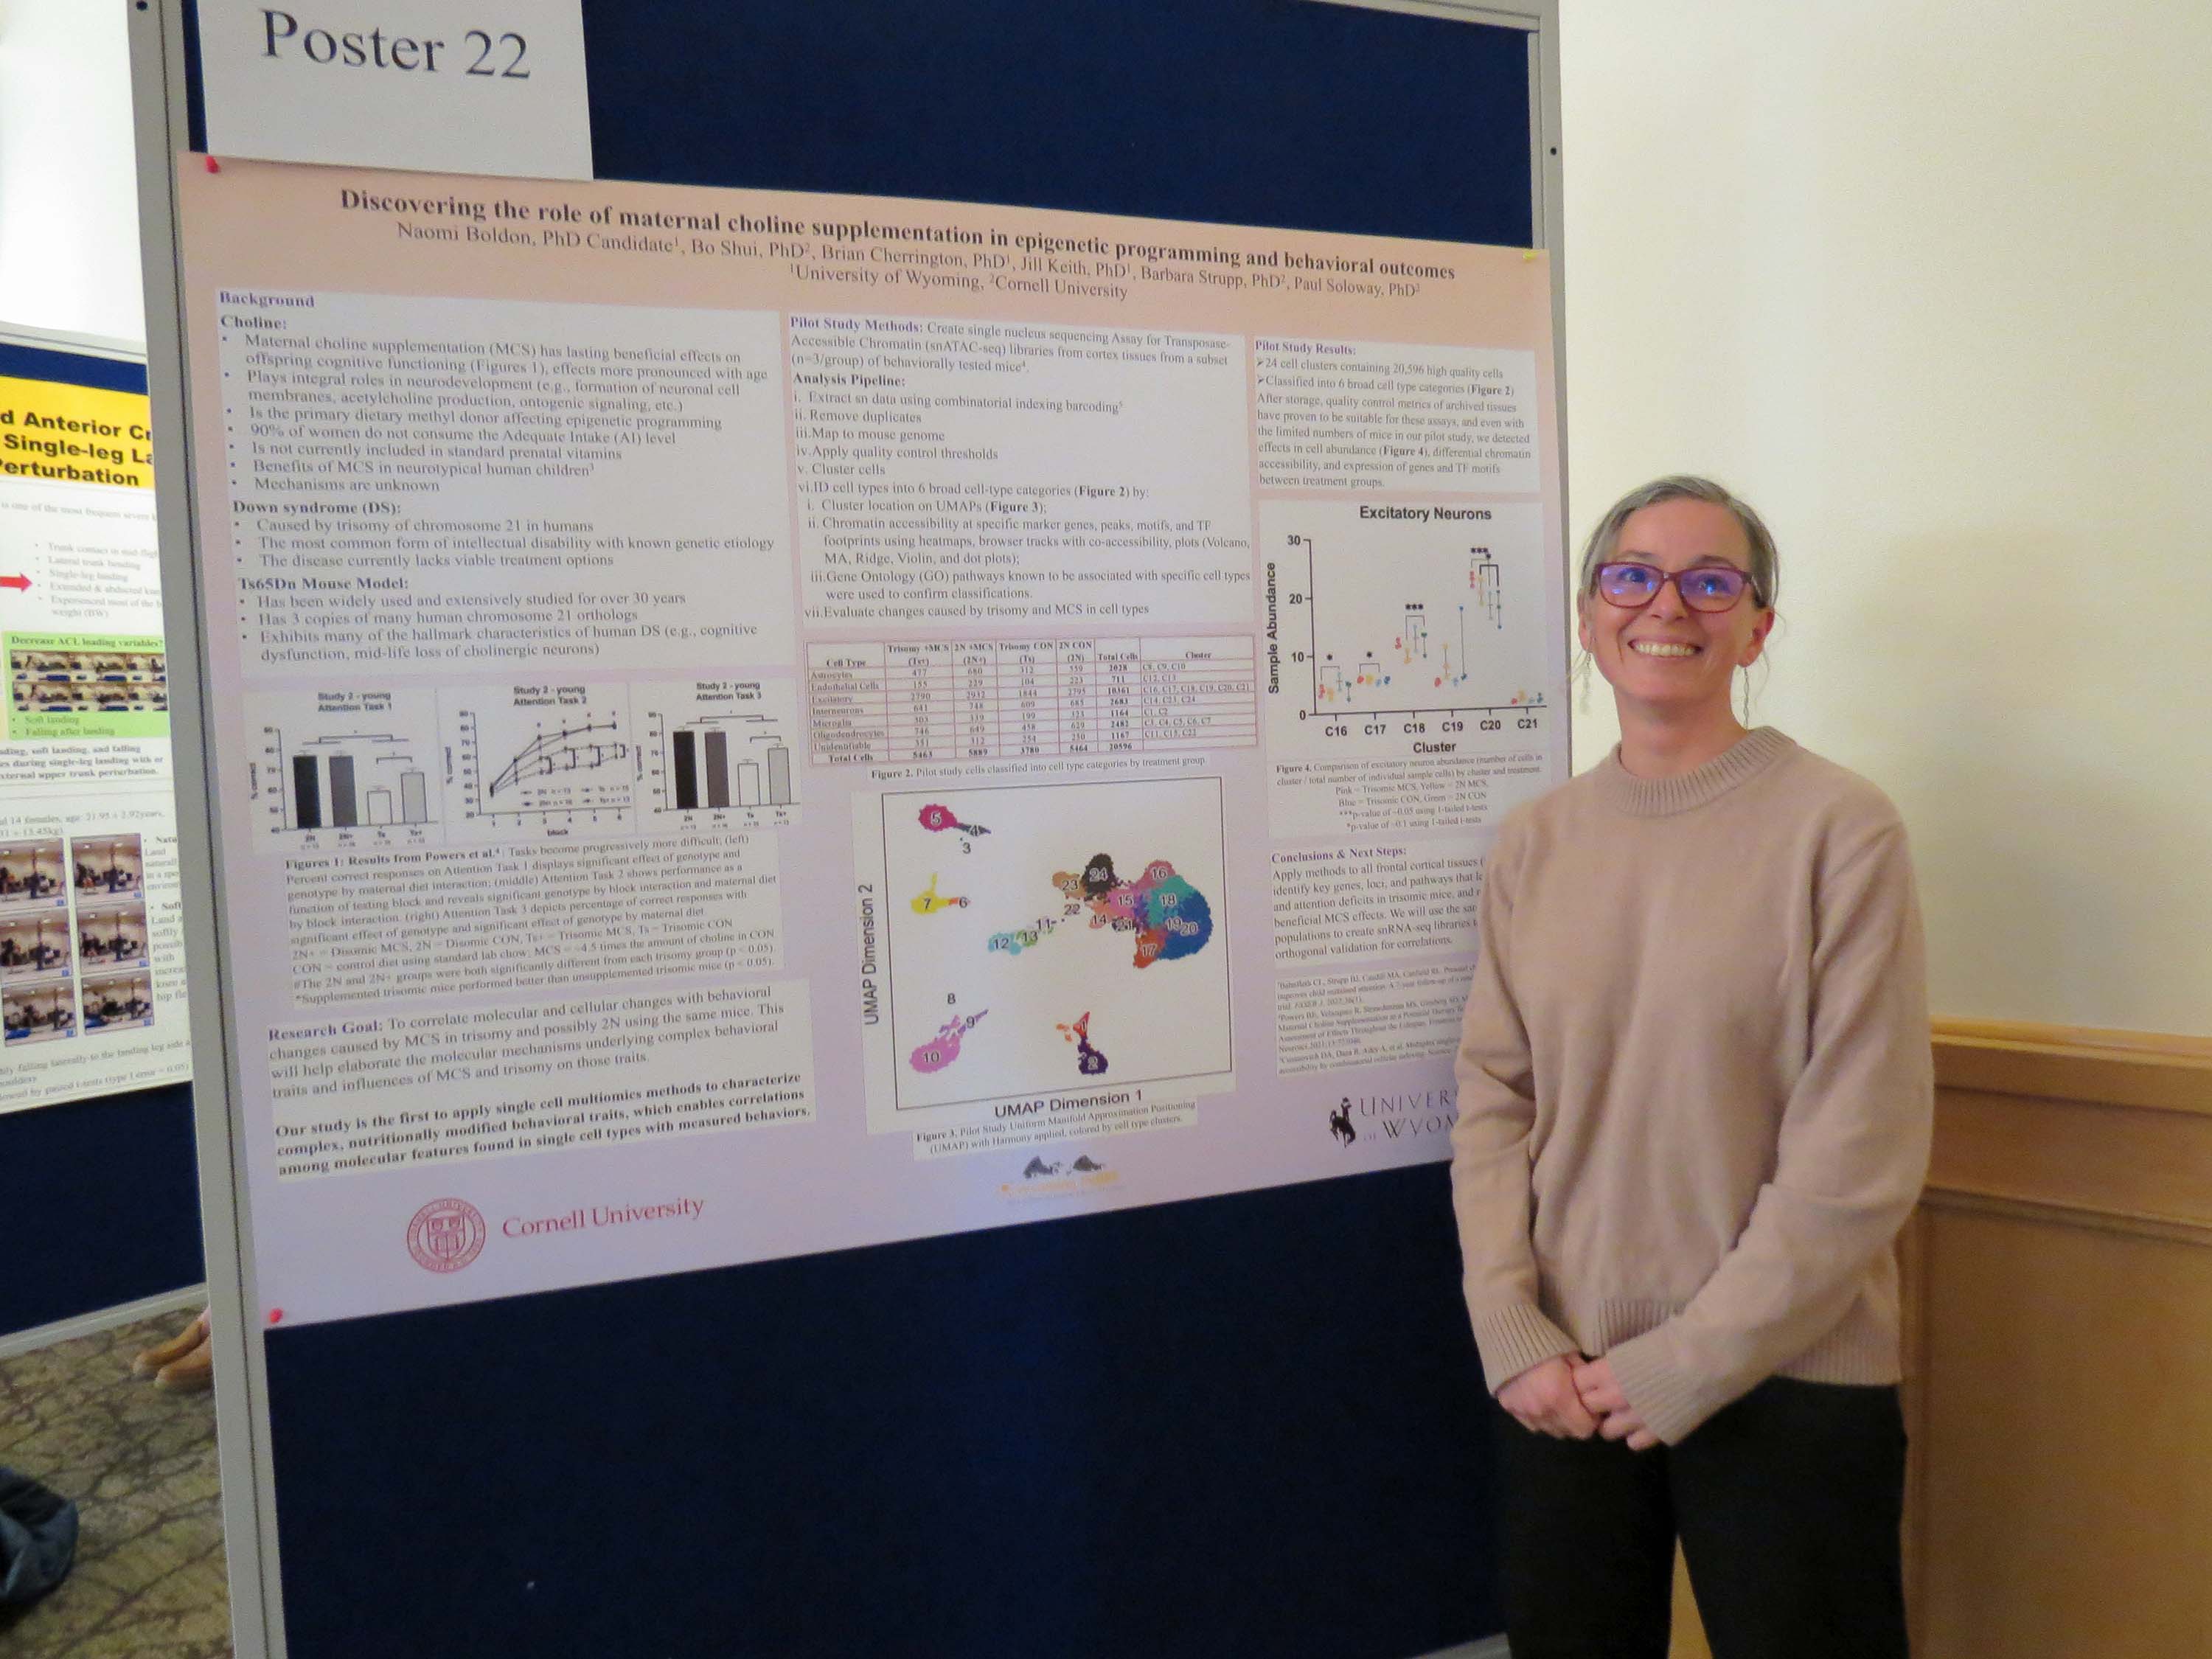 Female student standing in front of research poster.